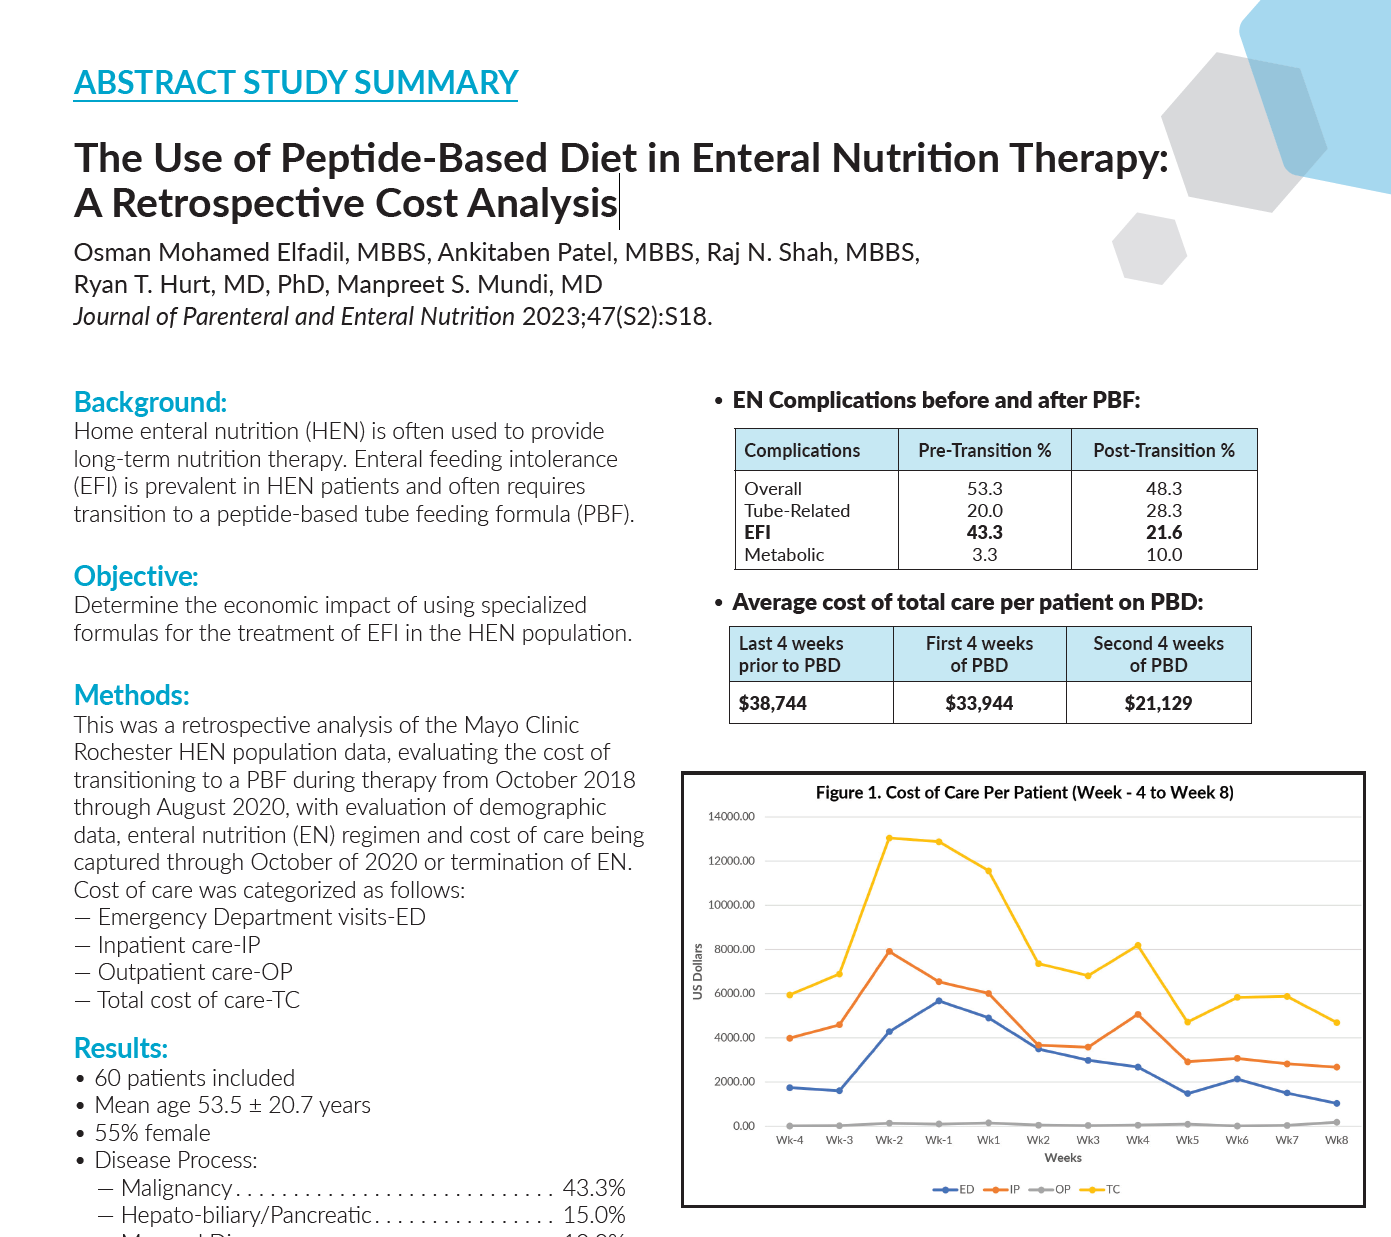 The Use of Peptide-Based Diet in Enteral Nutrition Therapy